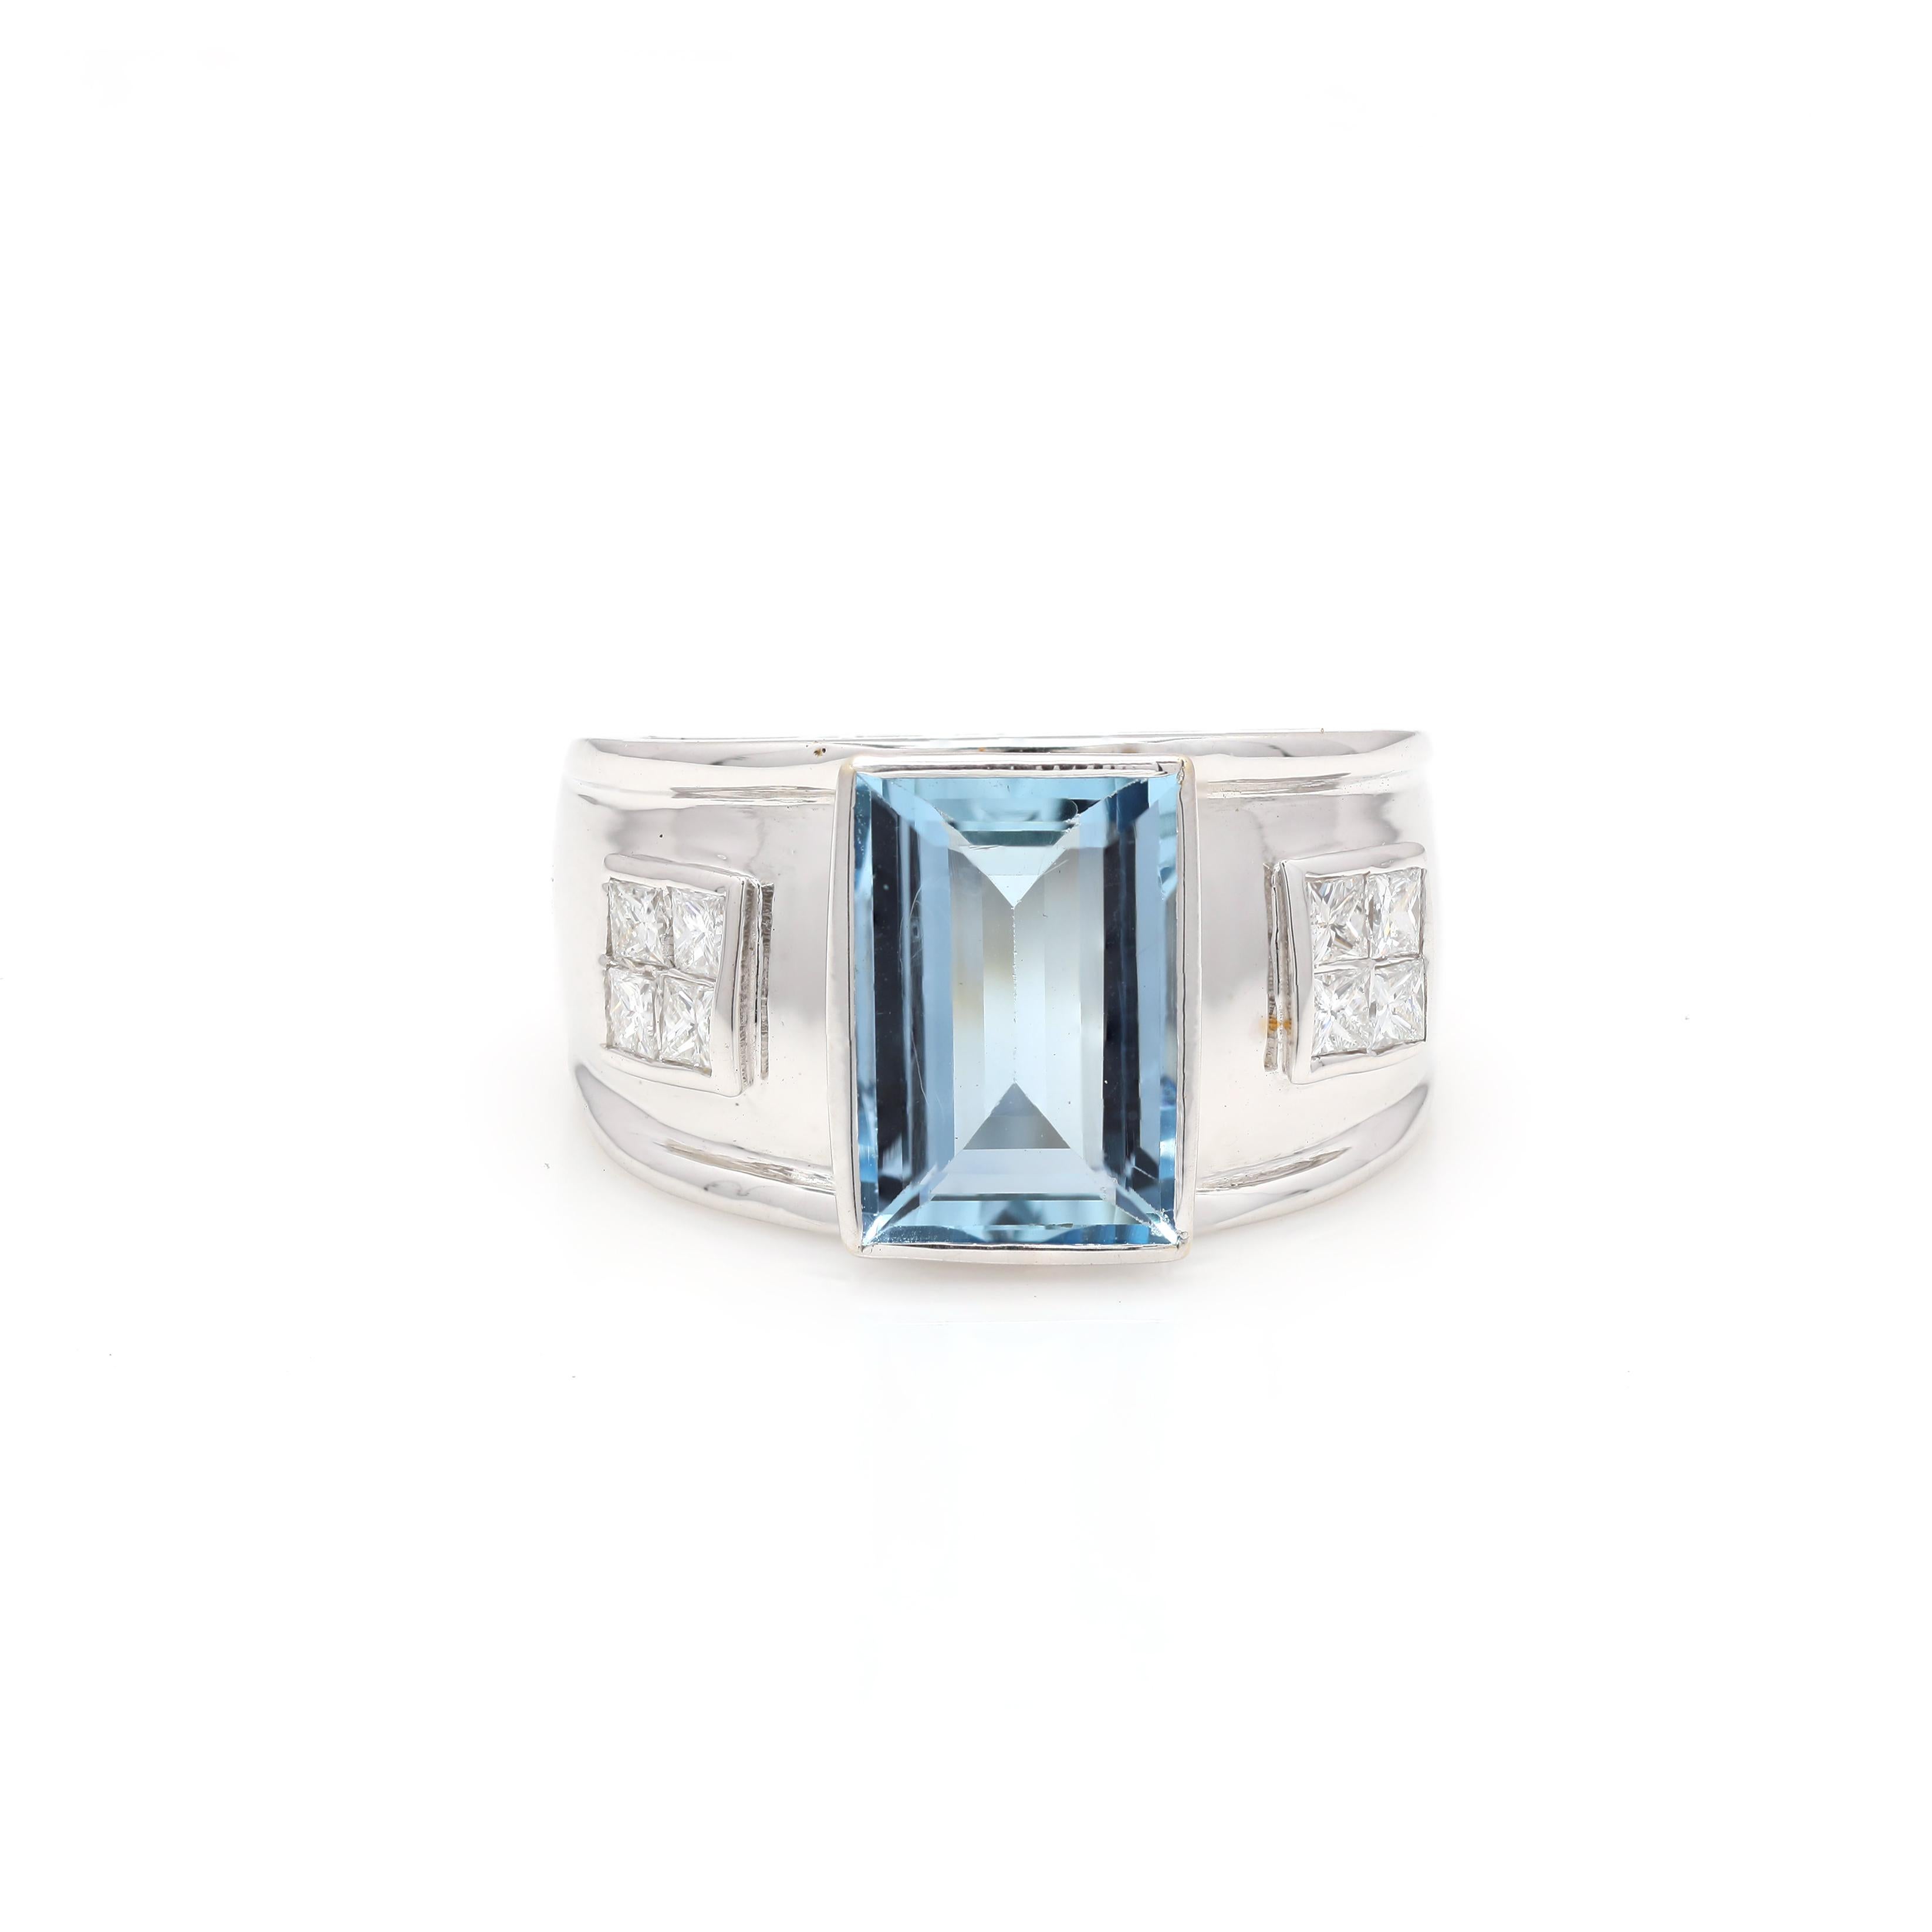 For Sale:  5.6 Carat Aquamarine Bold Men's Ring with Diamonds in 18K White Gold 3